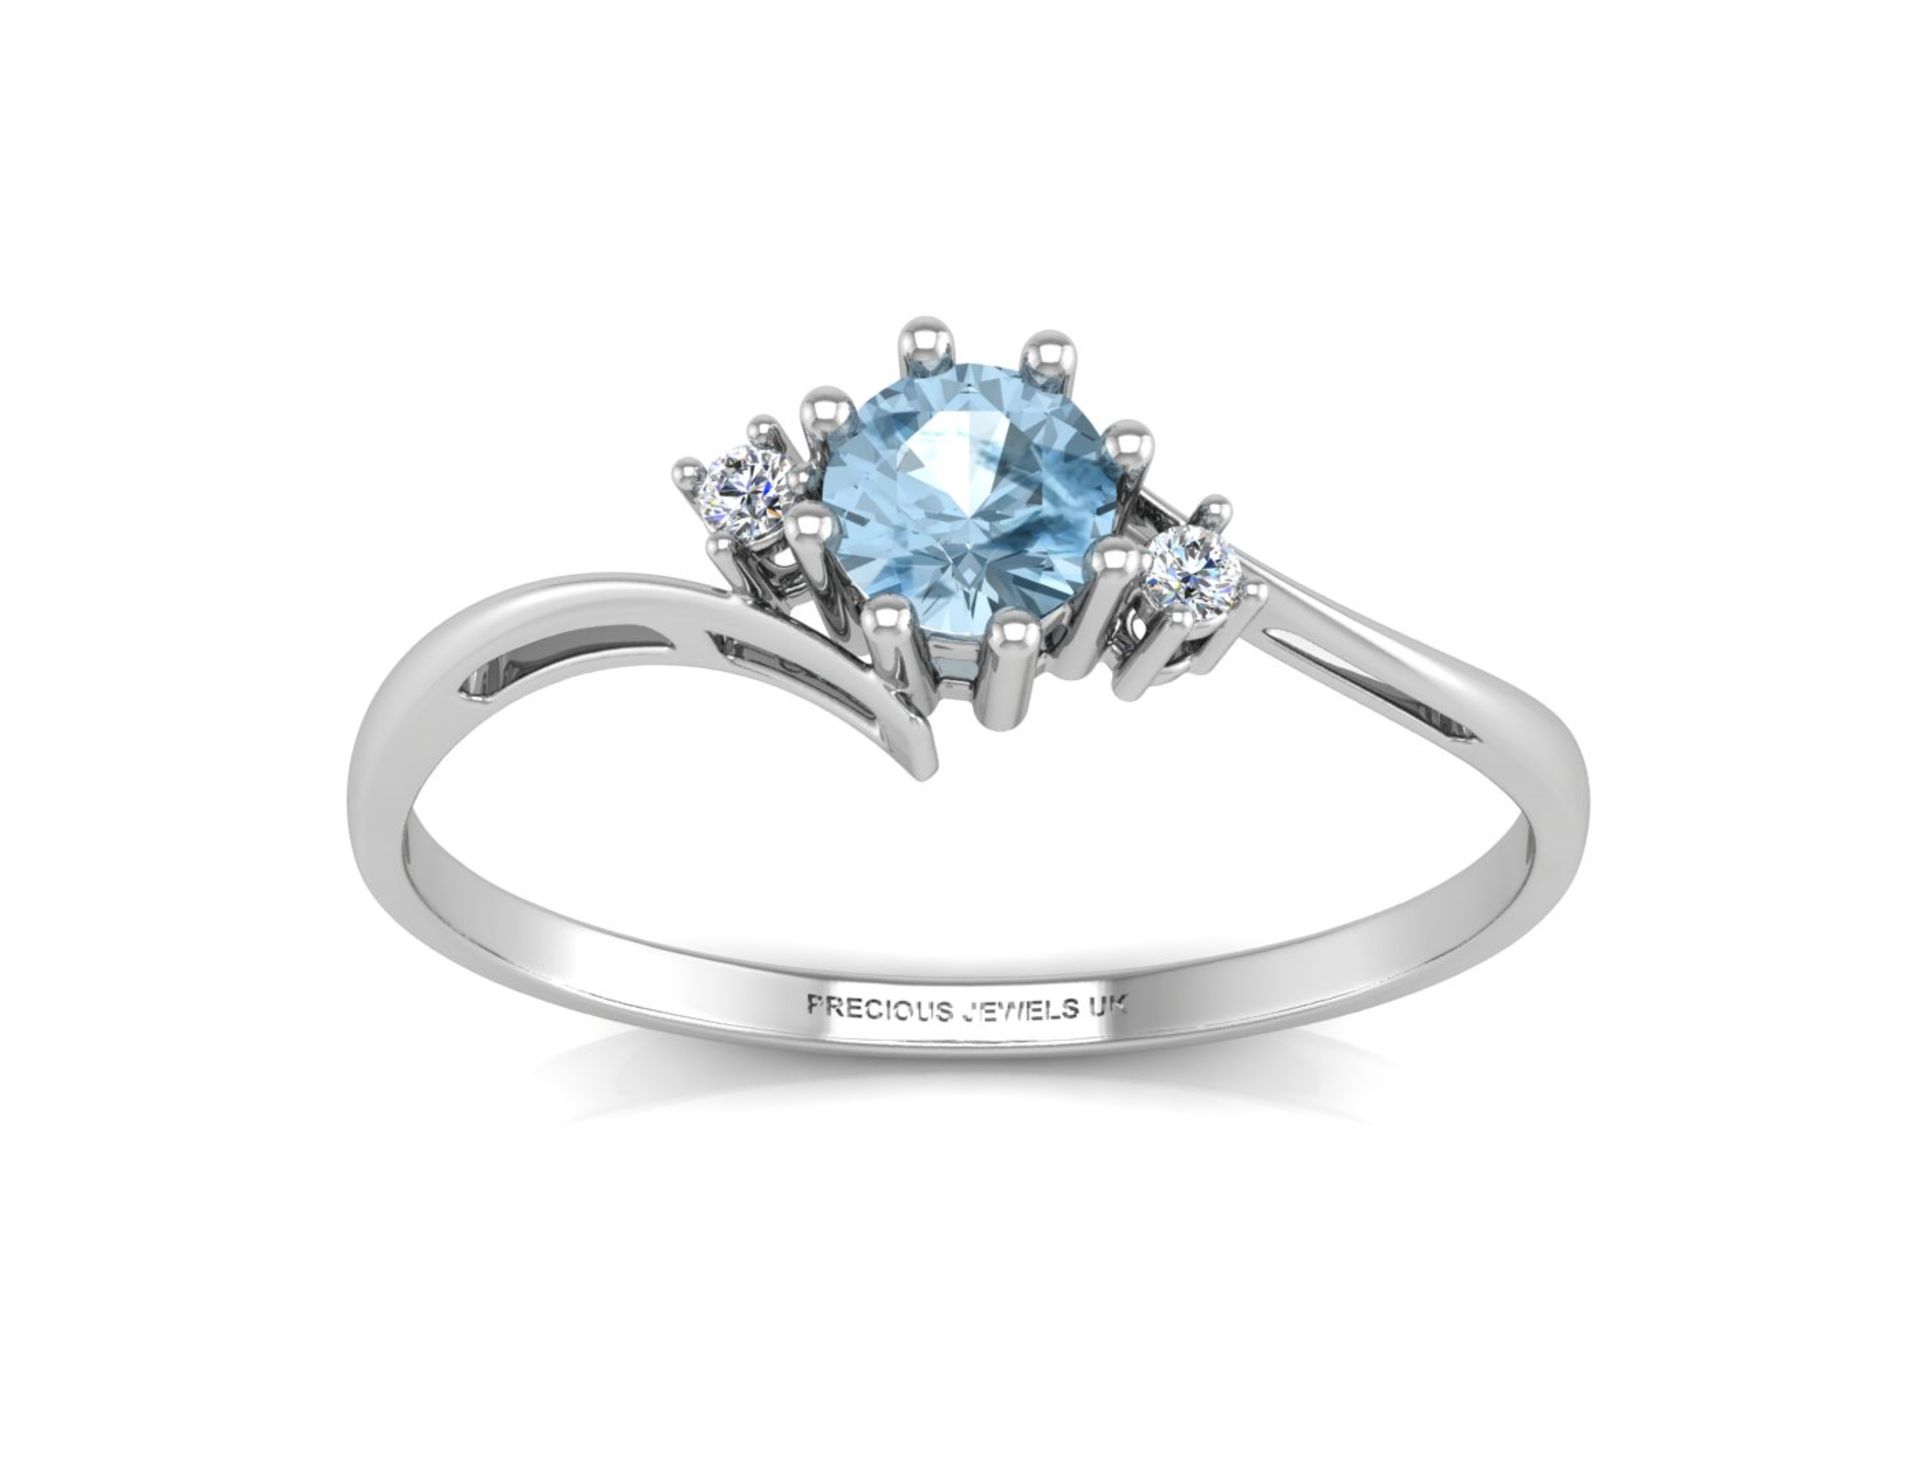 9ct White Gold Fancy Cluster Diamond And Blue Topaz Ring 0.01 Carats - Image 3 of 4